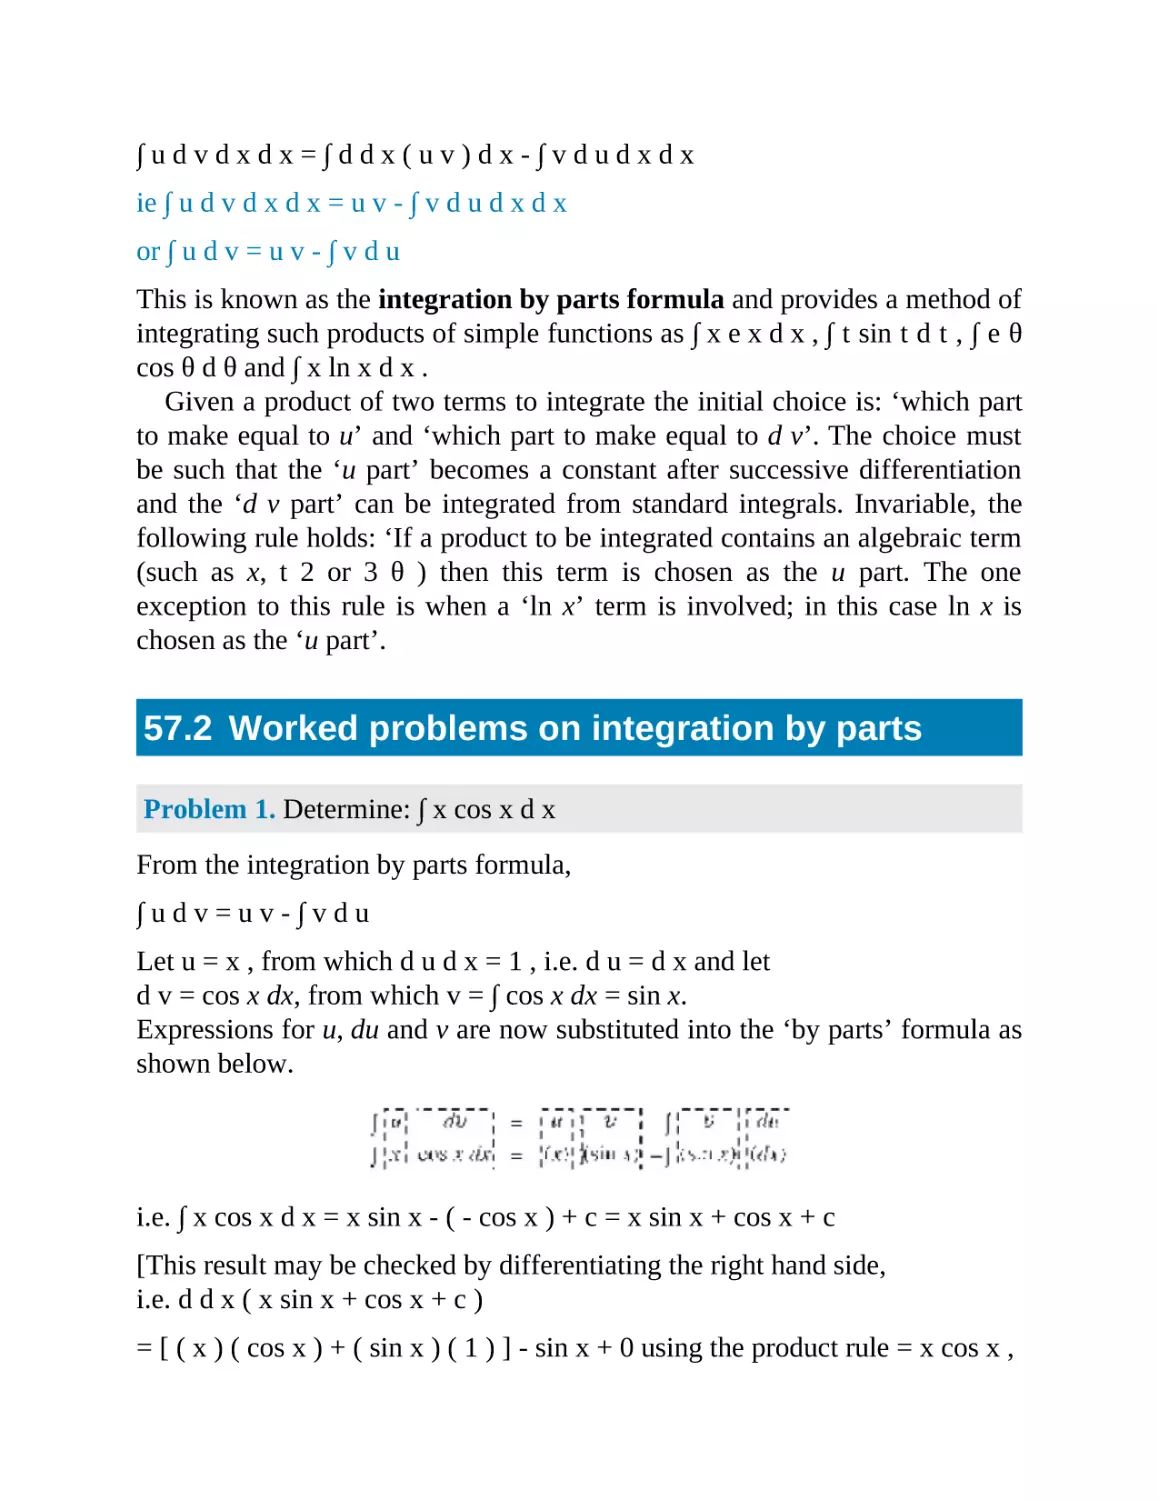 57.2 Worked problems on integration by parts